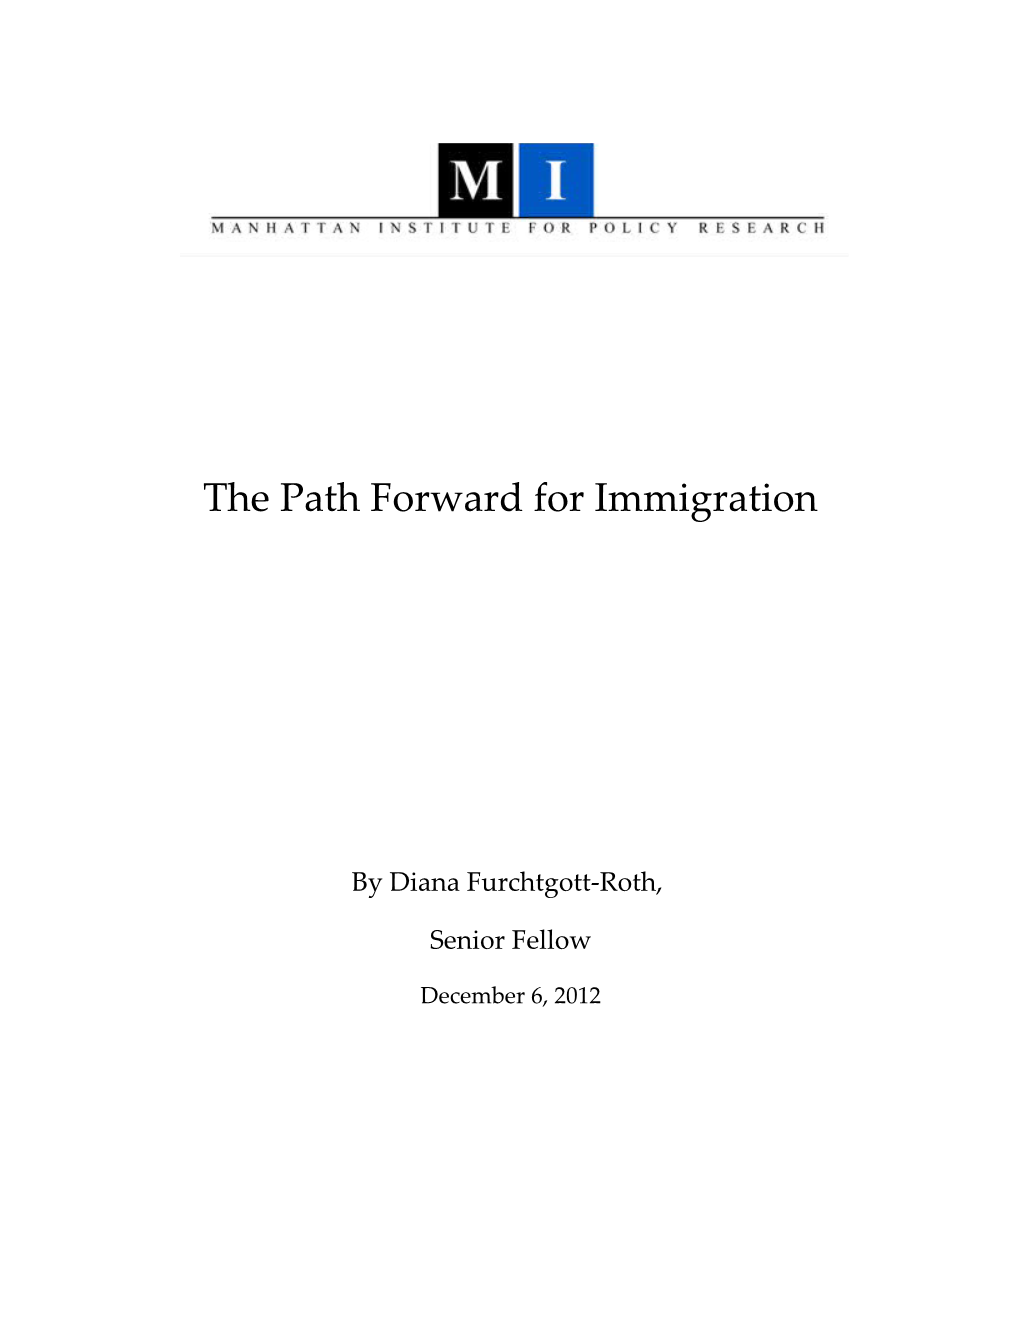 The Path Forward for Immigration